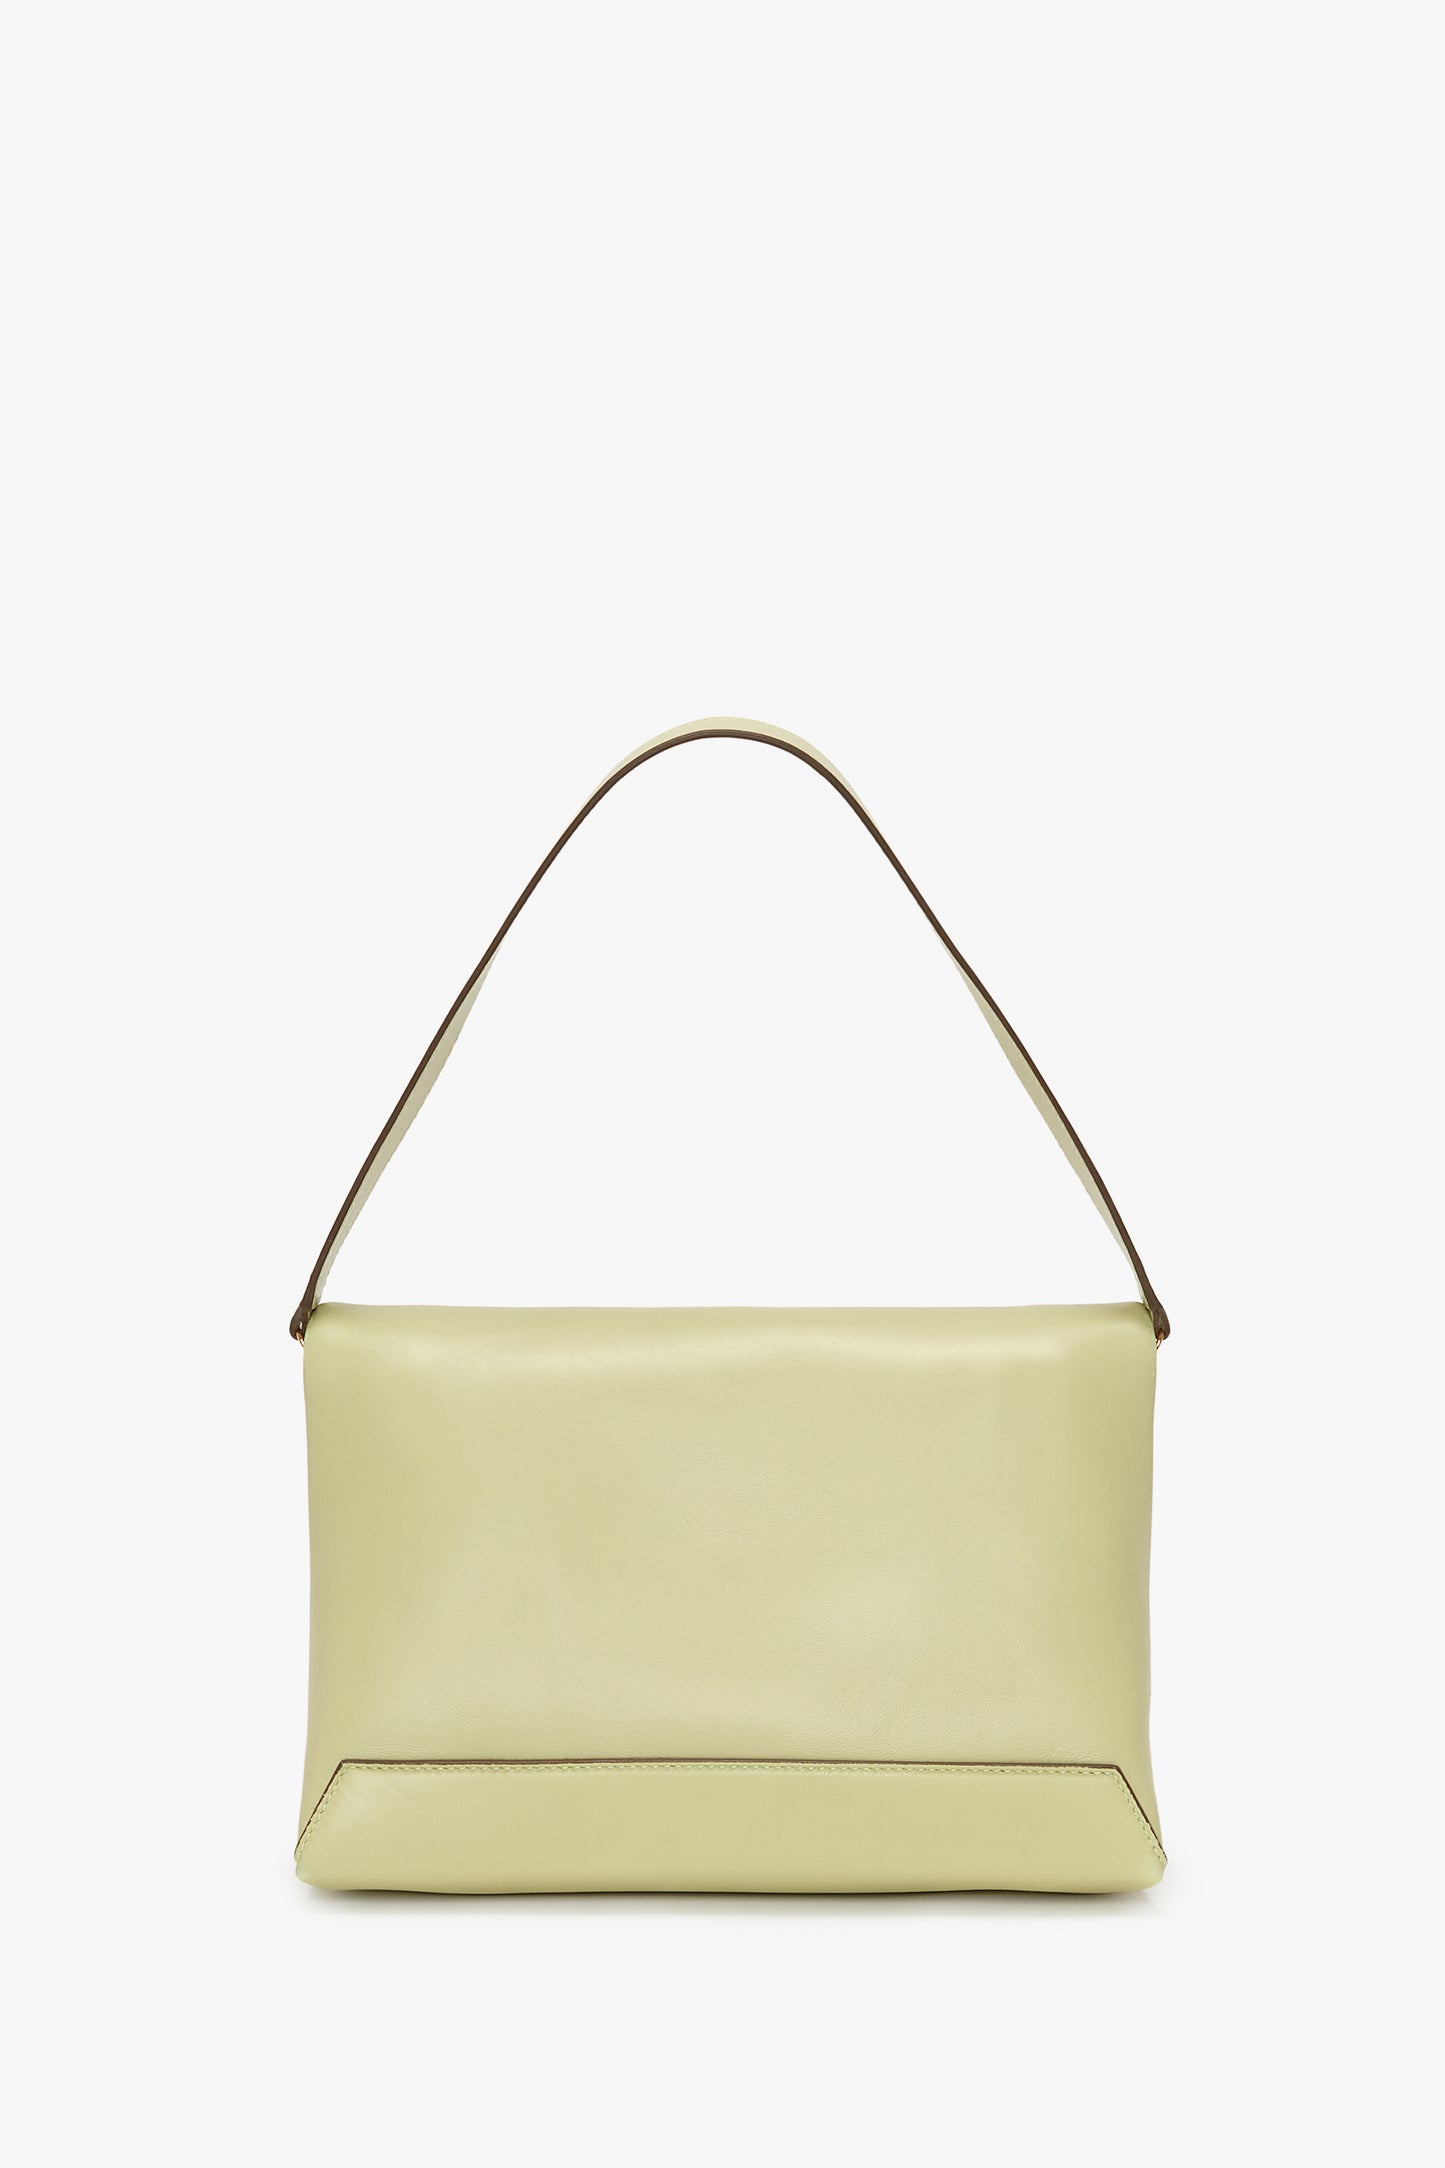 An elegant Victoria Beckham Avocado Leather Chain Pouch With Strap, with a smooth finish and gold chain detail, displayed against a white background.